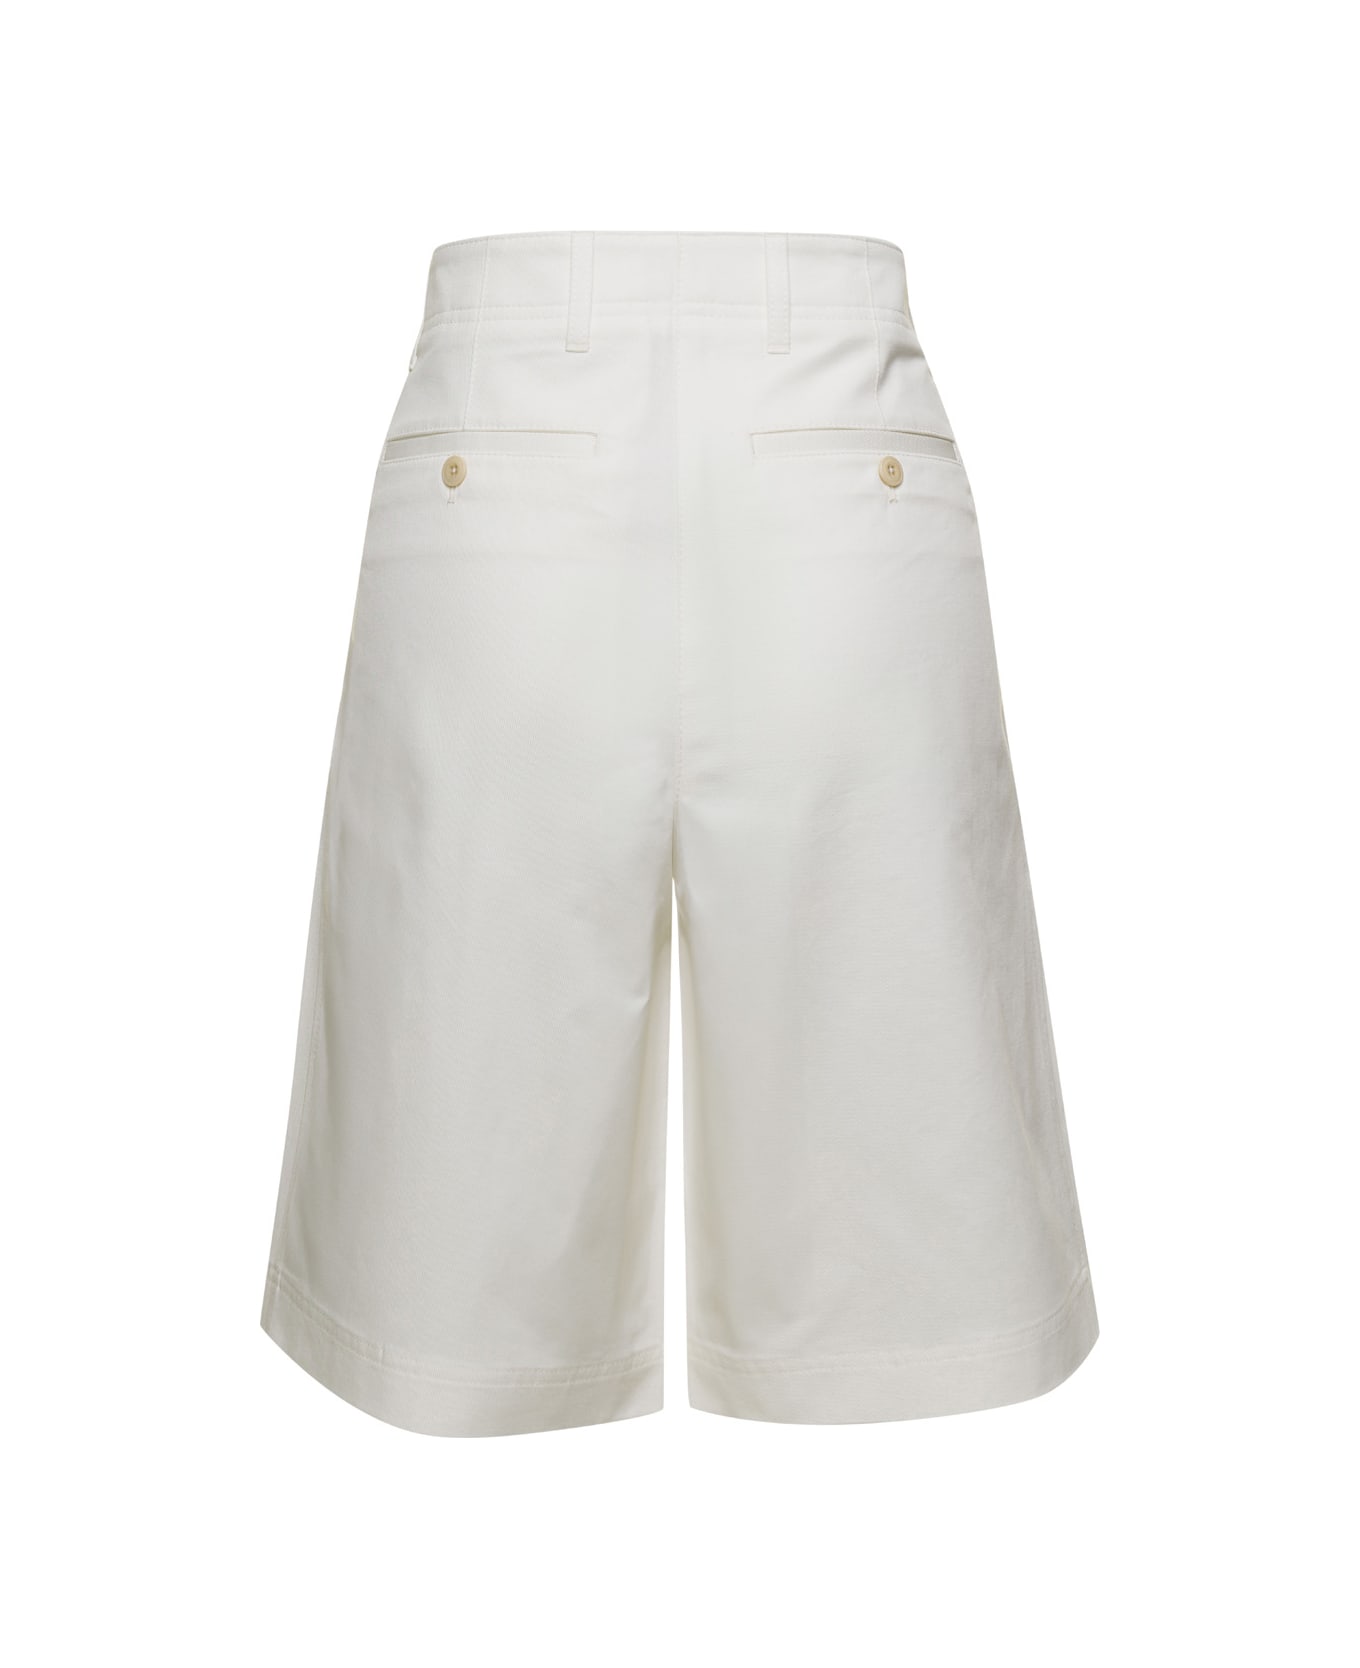 Totême White Twill Pleated Bermuda Shorts In Cotton Woman - White ボトムス